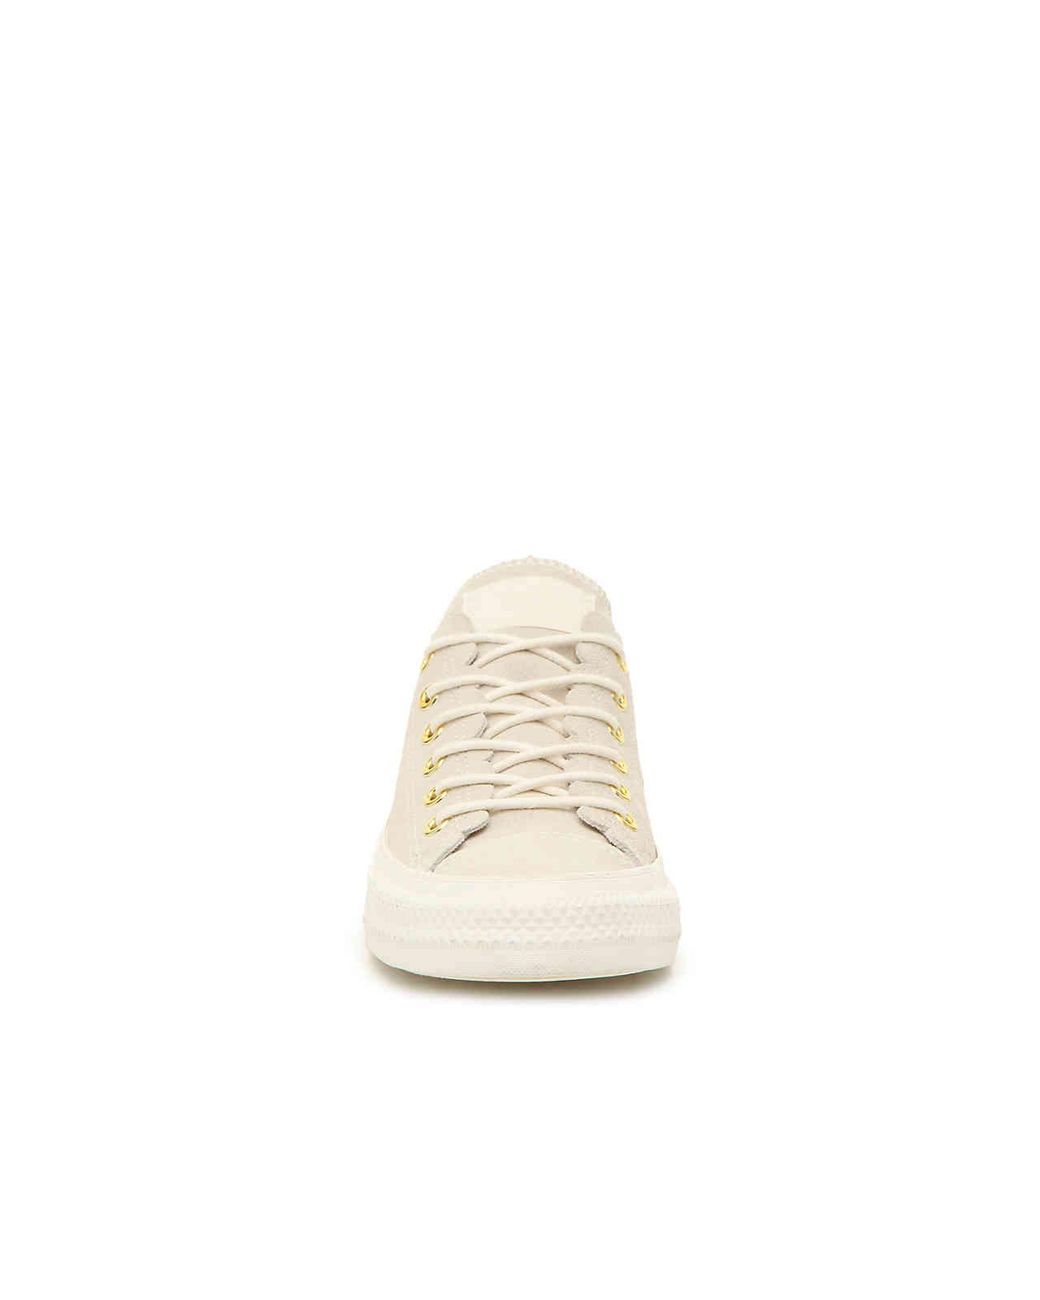 Converse Suede Chuck Taylor All Star Scallop Sneaker in White | Lyst